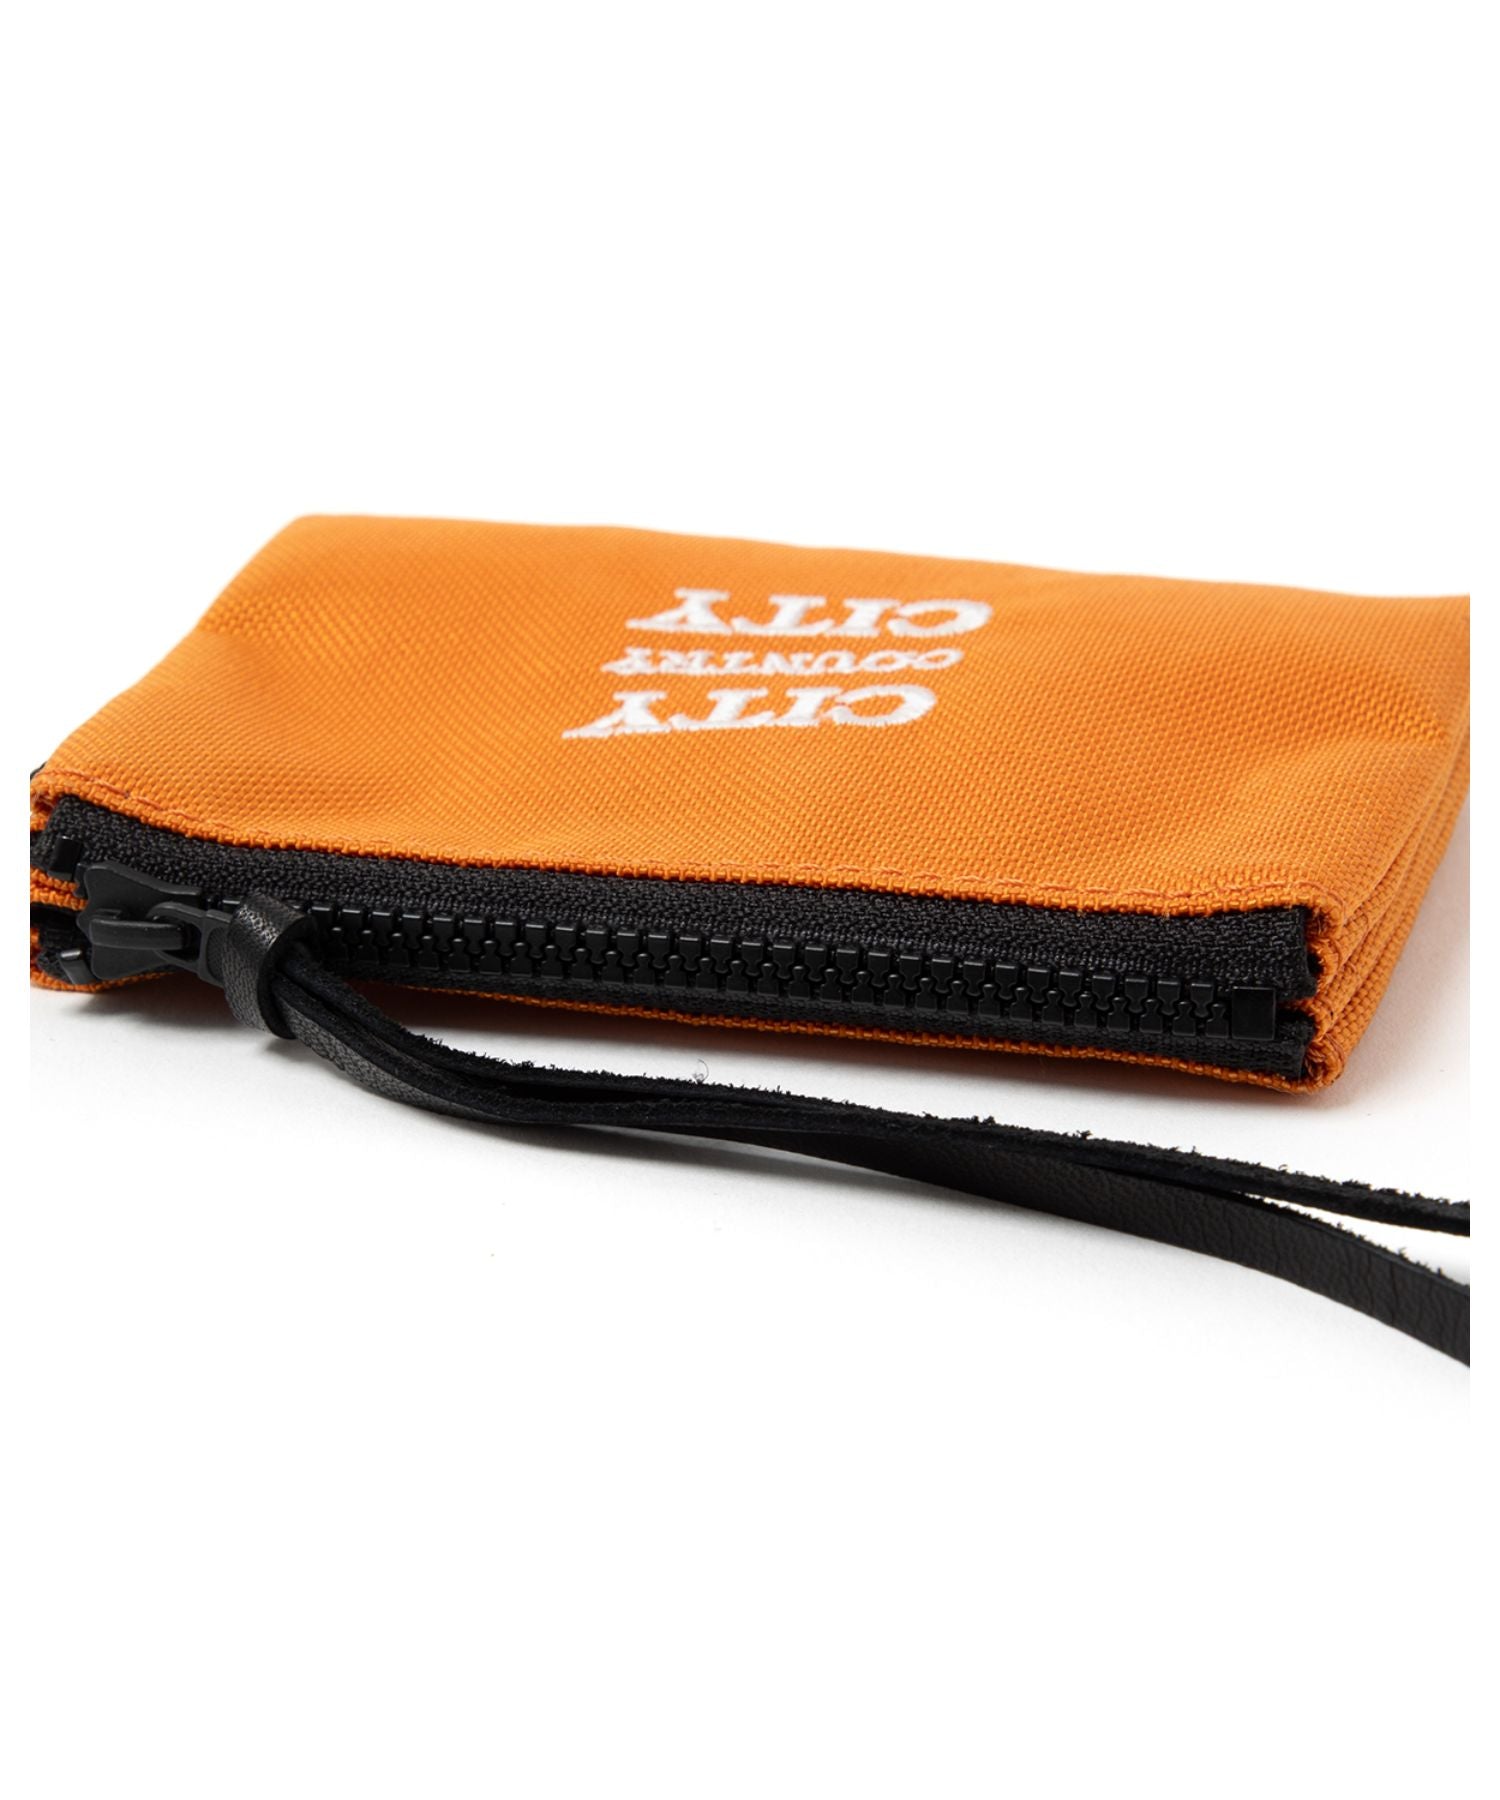 Everyday Zip Case Nylon Oxford For City Country City